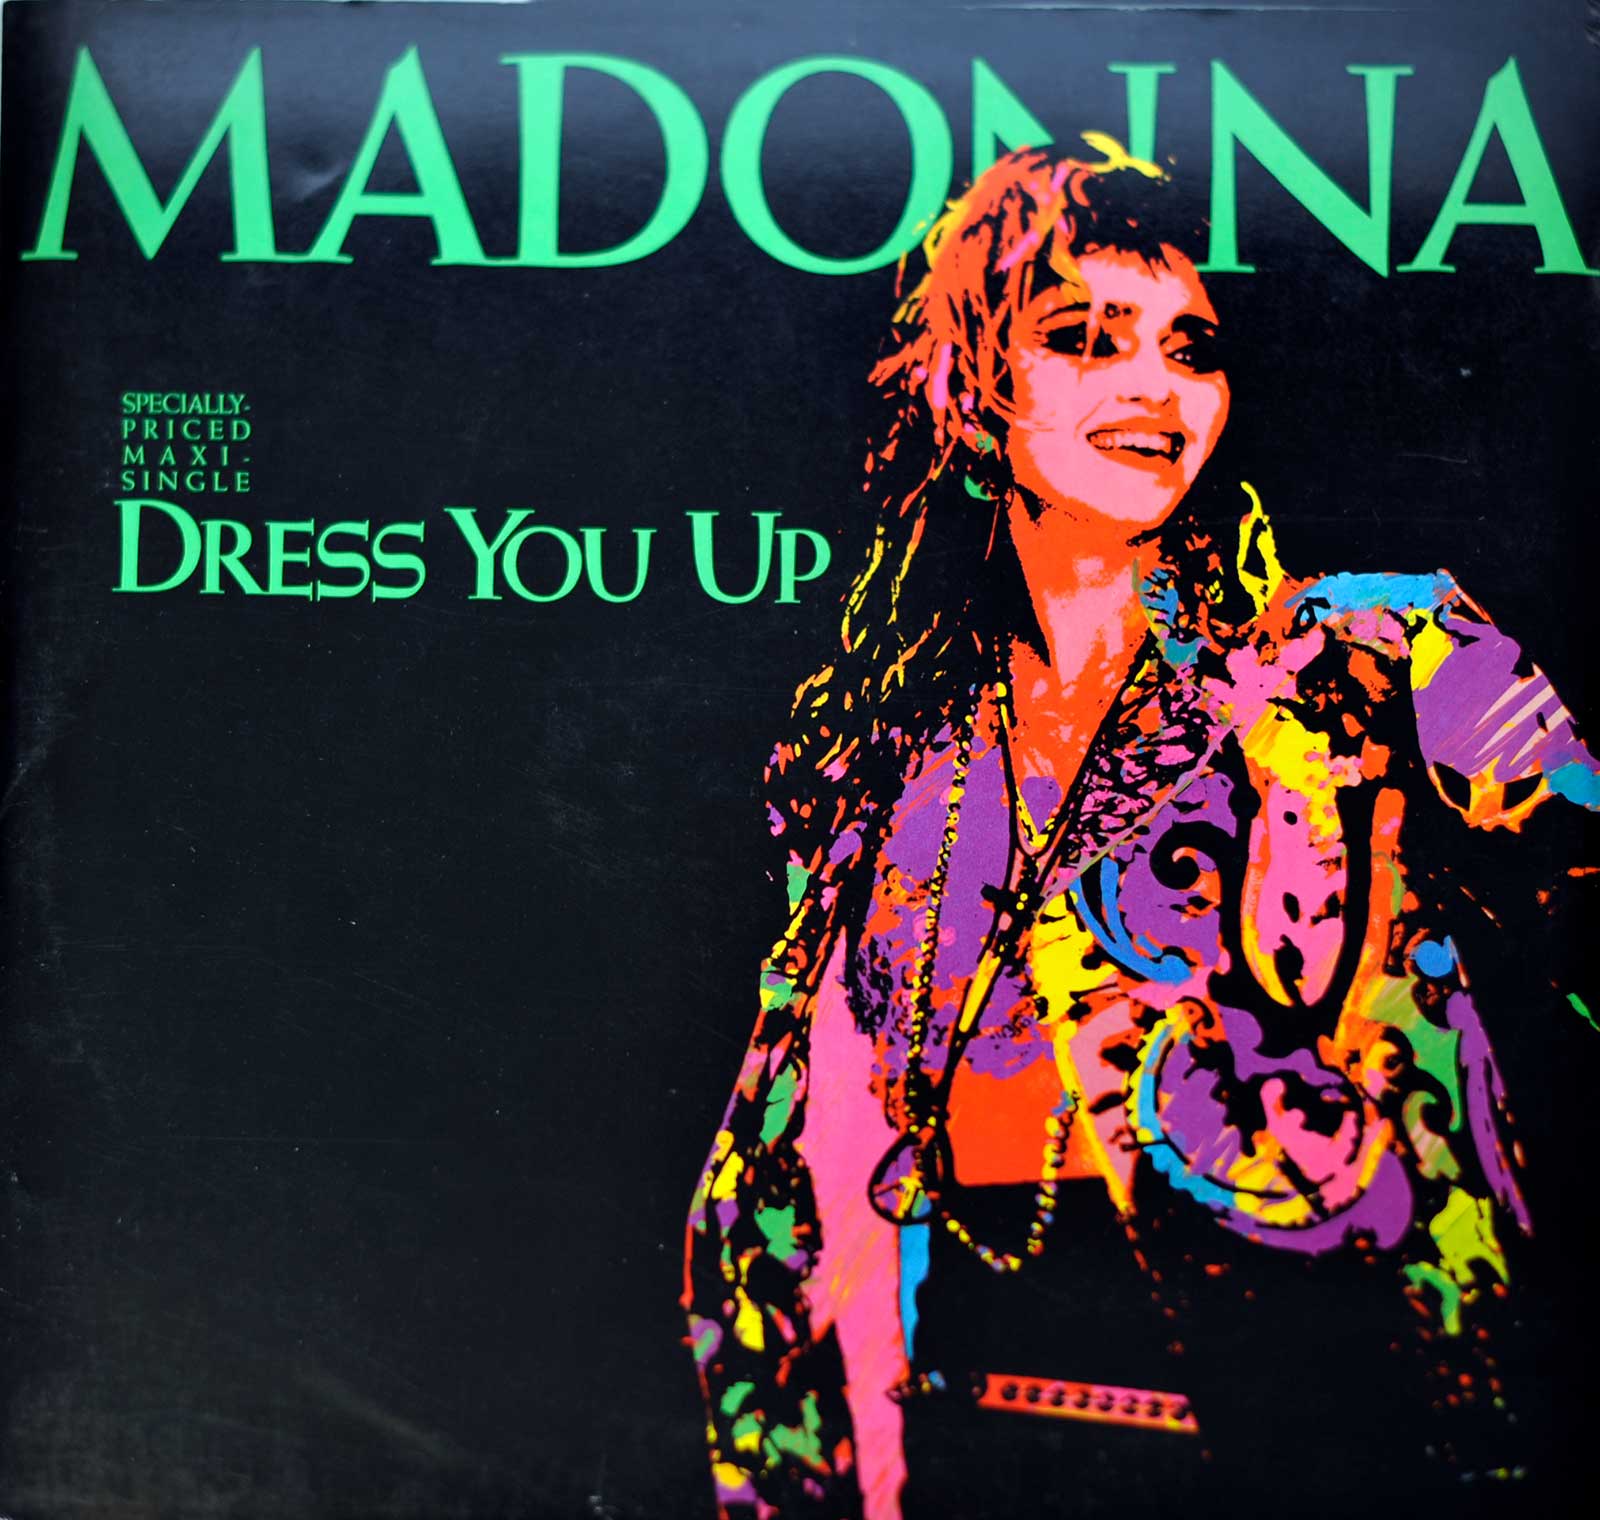 large album front cover photo of: Madonna Dress You Up 